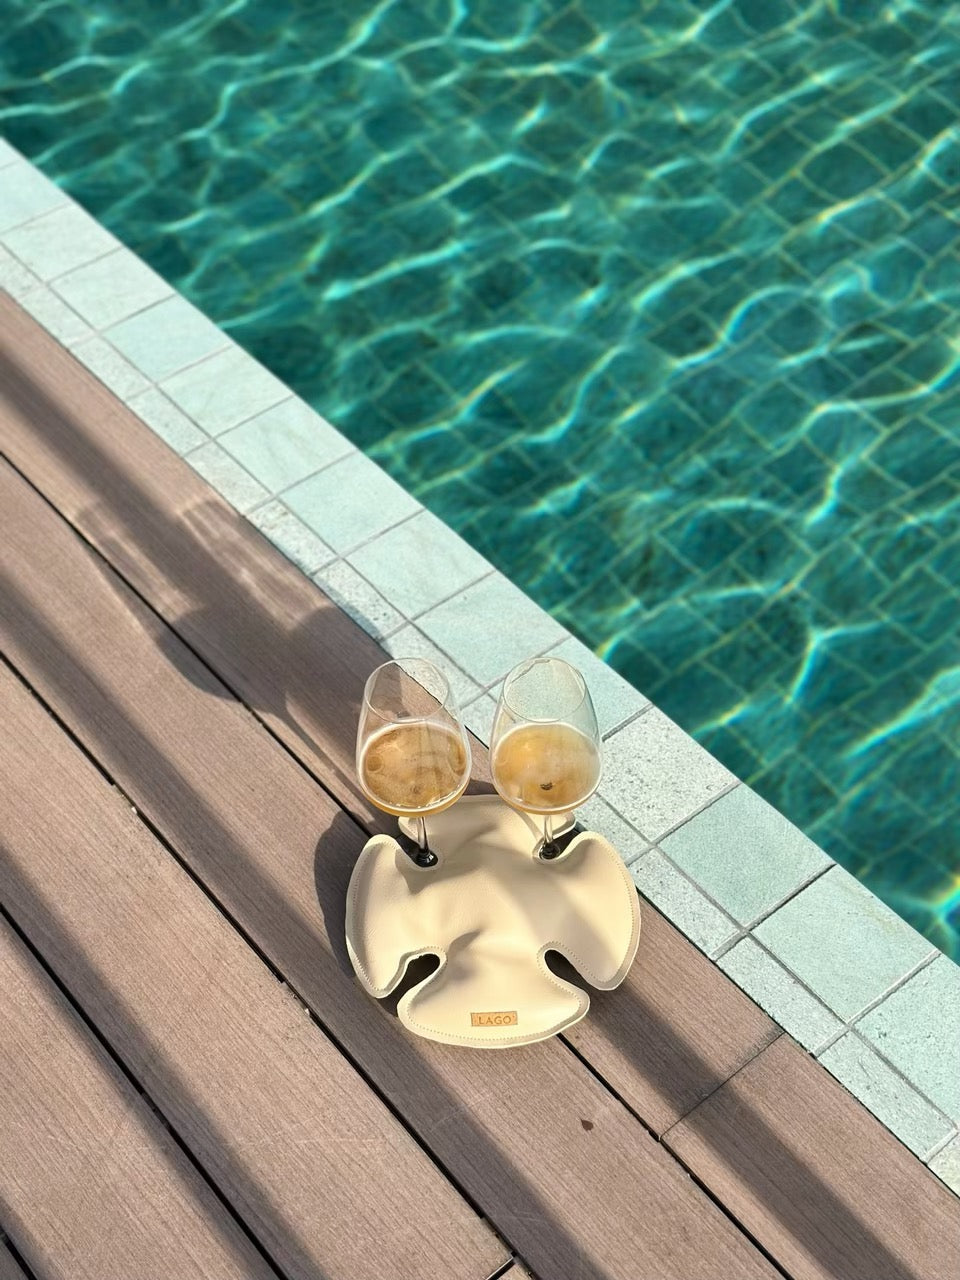 2 wine glasses secured by Lago sand dollar on a deck by the pool.